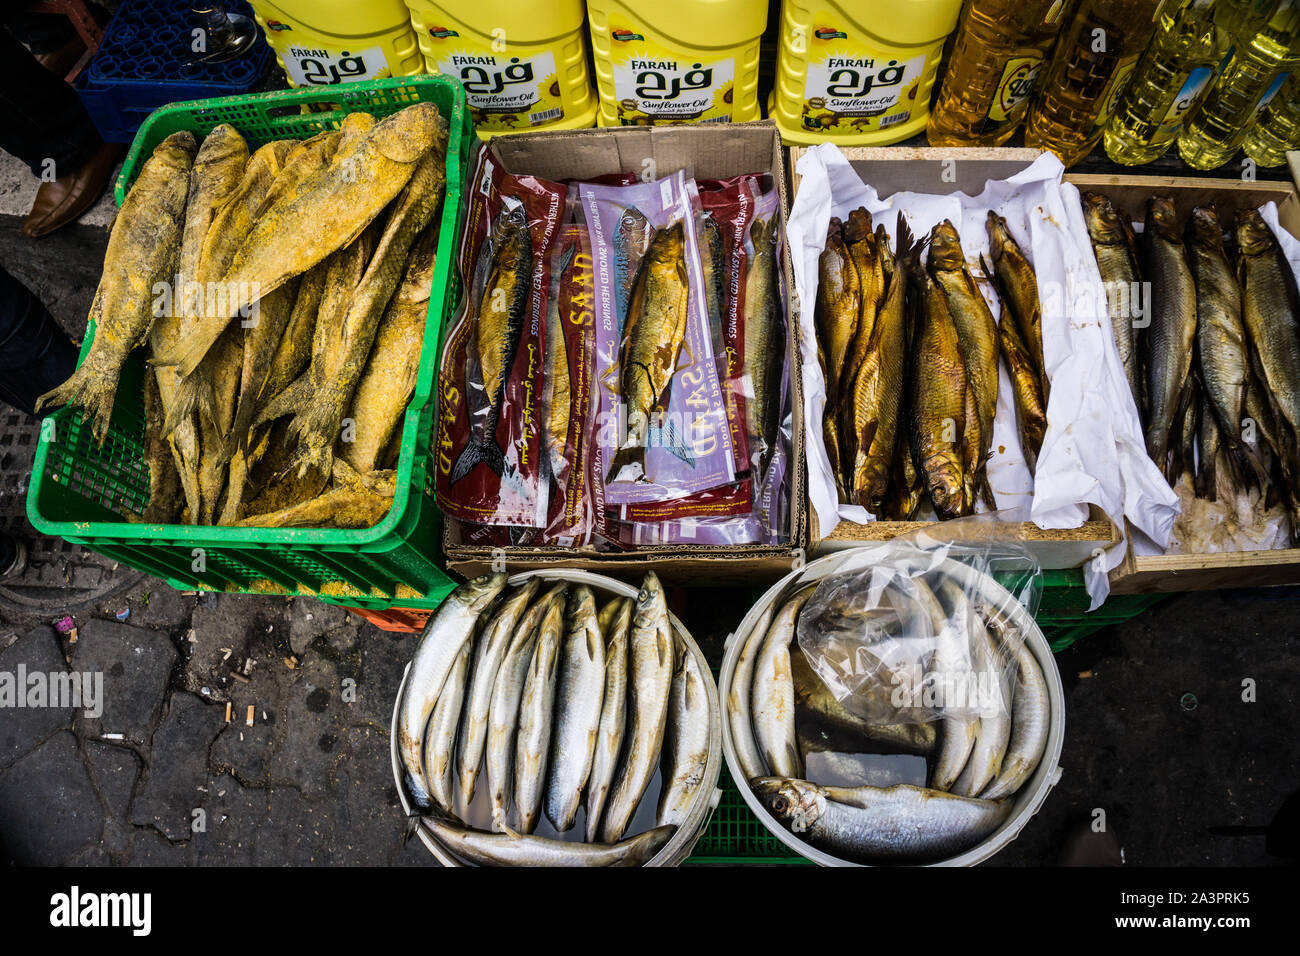 Dried and salted fish for sale in a neighborhood market, Amman, Jordan Stock Photo